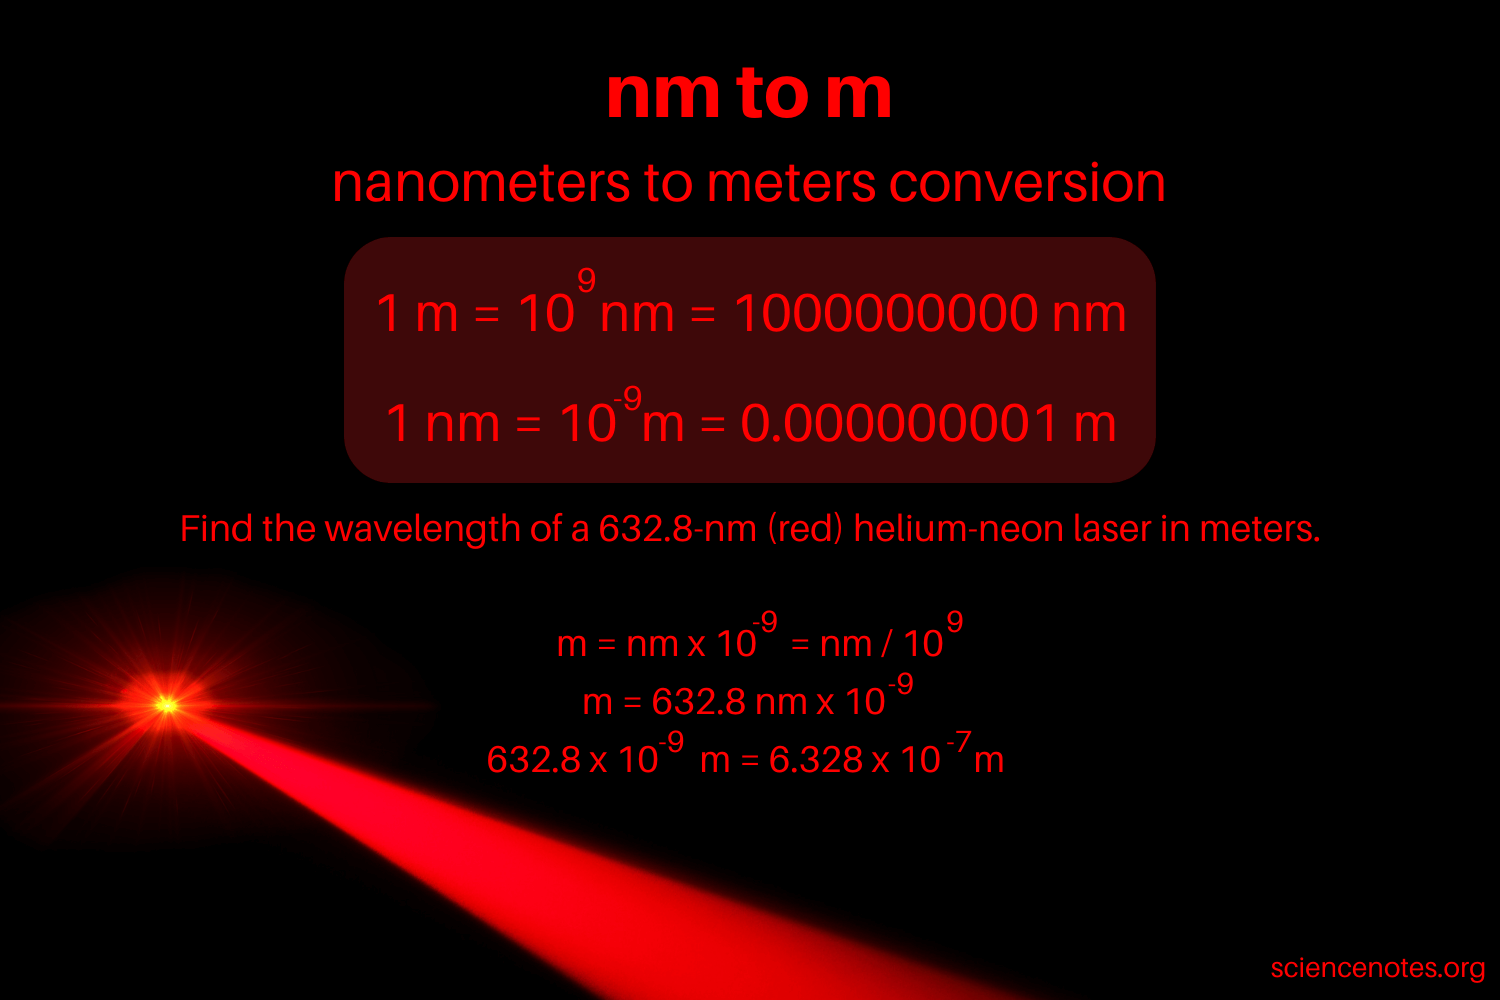 how to convert from meter to nanometer